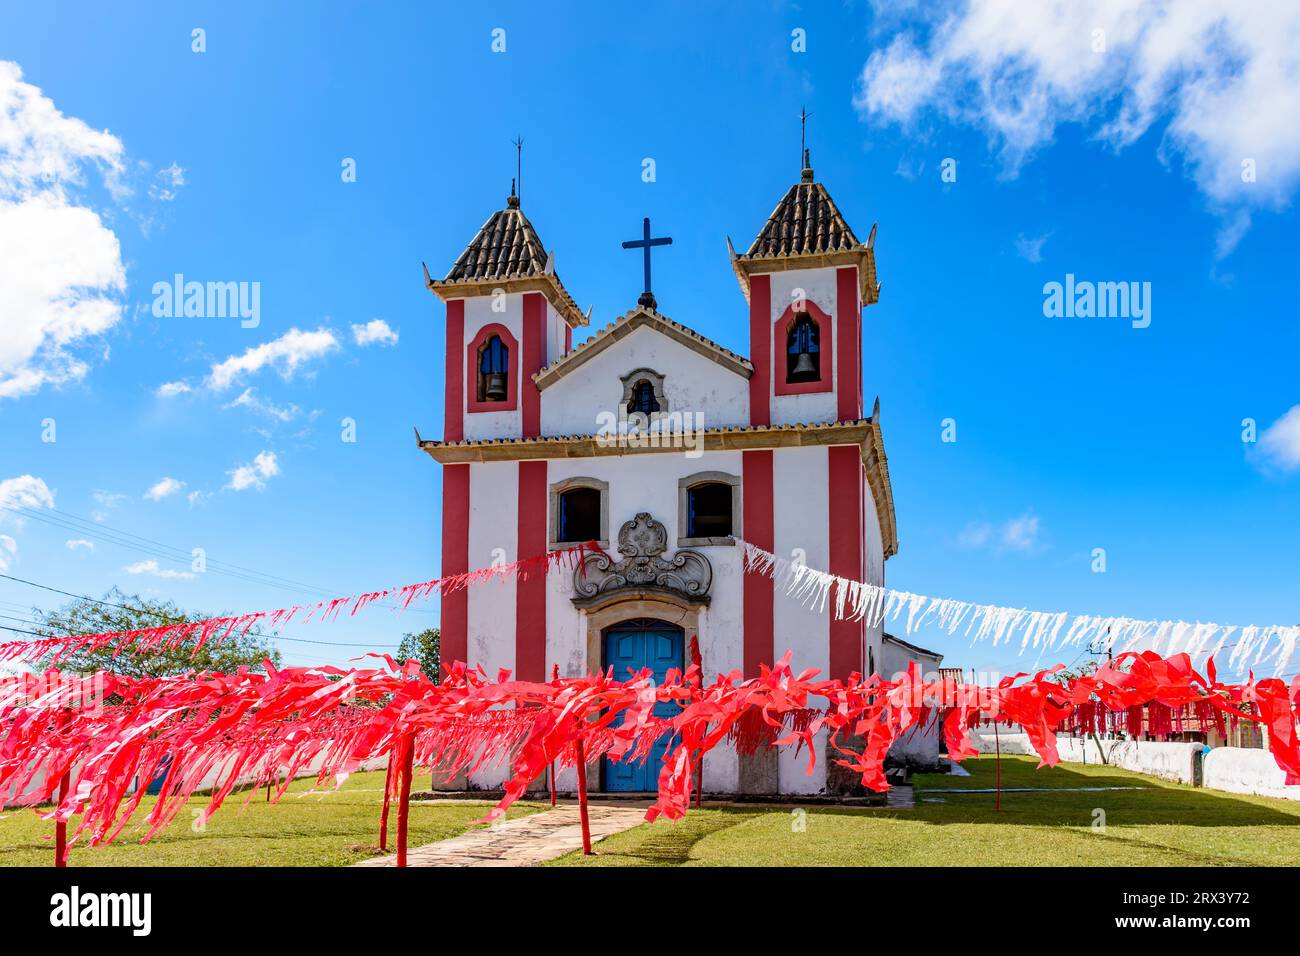 Historic church decorated with colorful ribbons for religious celebrations in the city of Lavras Novas in Minas Gerais Stock Photo